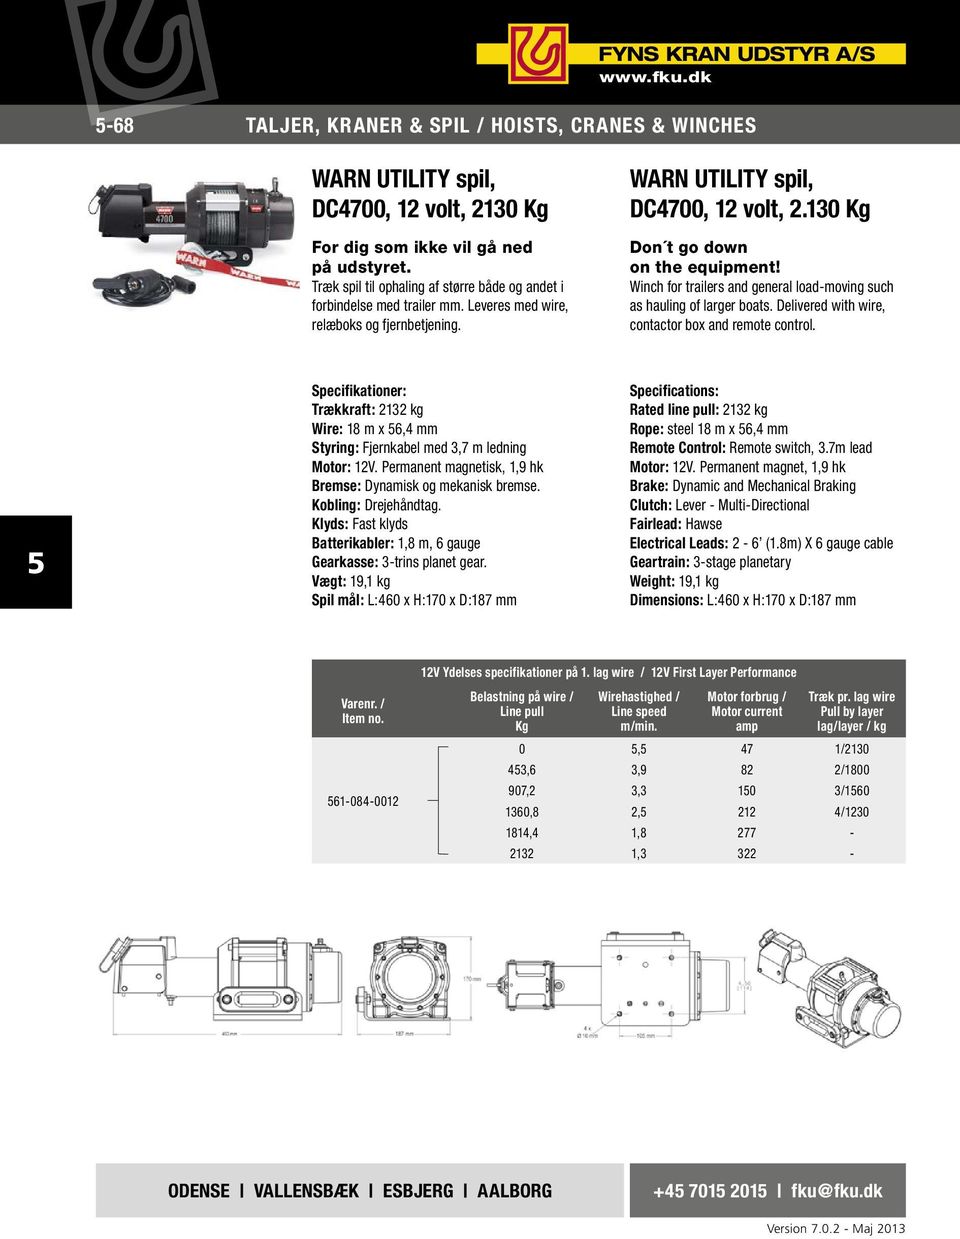 Winch for trailers and general load-moving such as hauling of larger boats. Delivered with wire, contactor box and remote control.